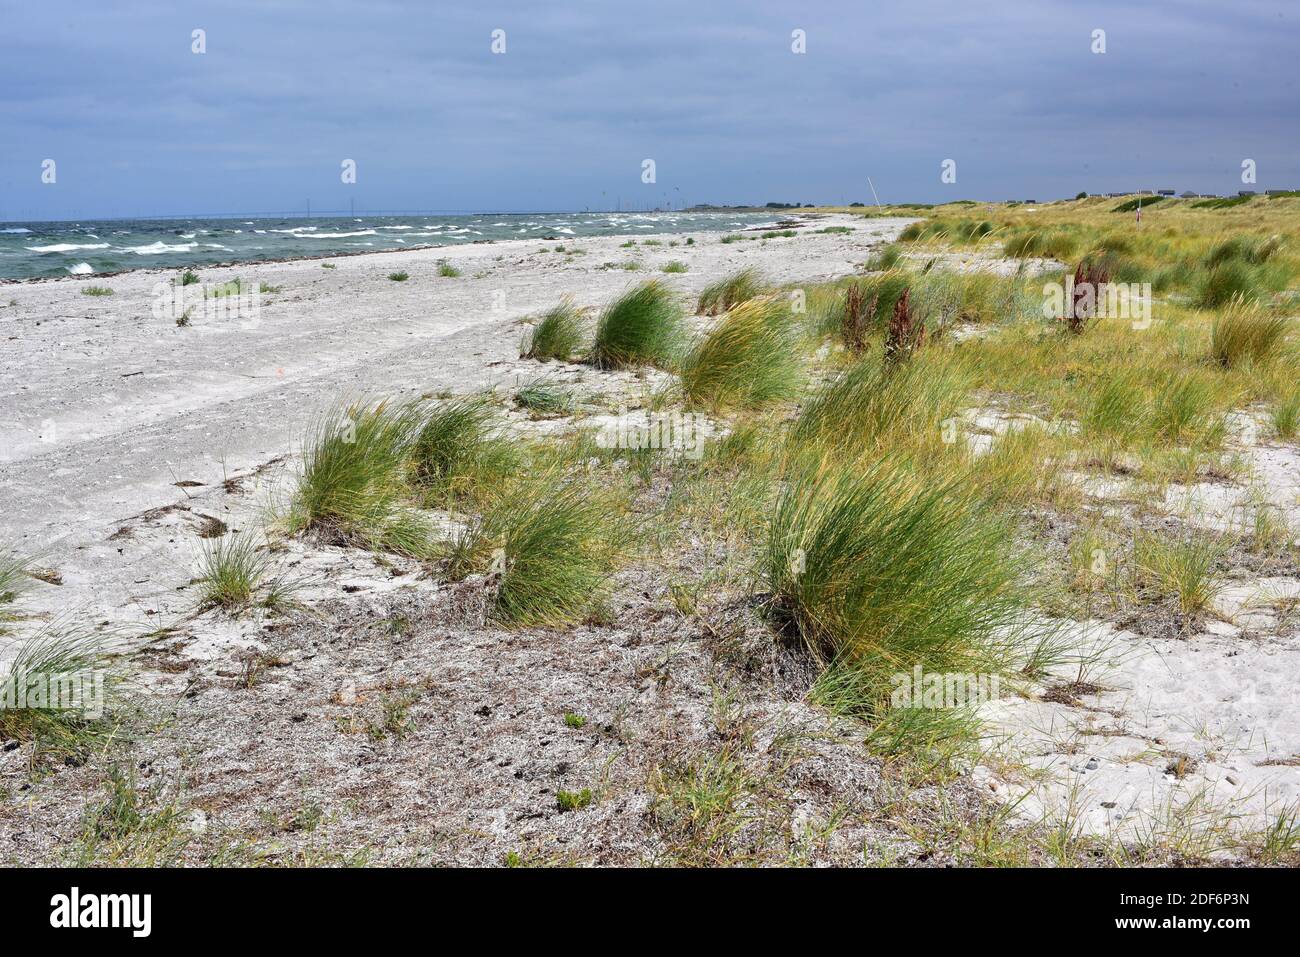 European beachgrass or European marram grass (Ammophila arenaria) is a perennial herb native to coastlines of Europe and north Africa. This photo was Stock Photo